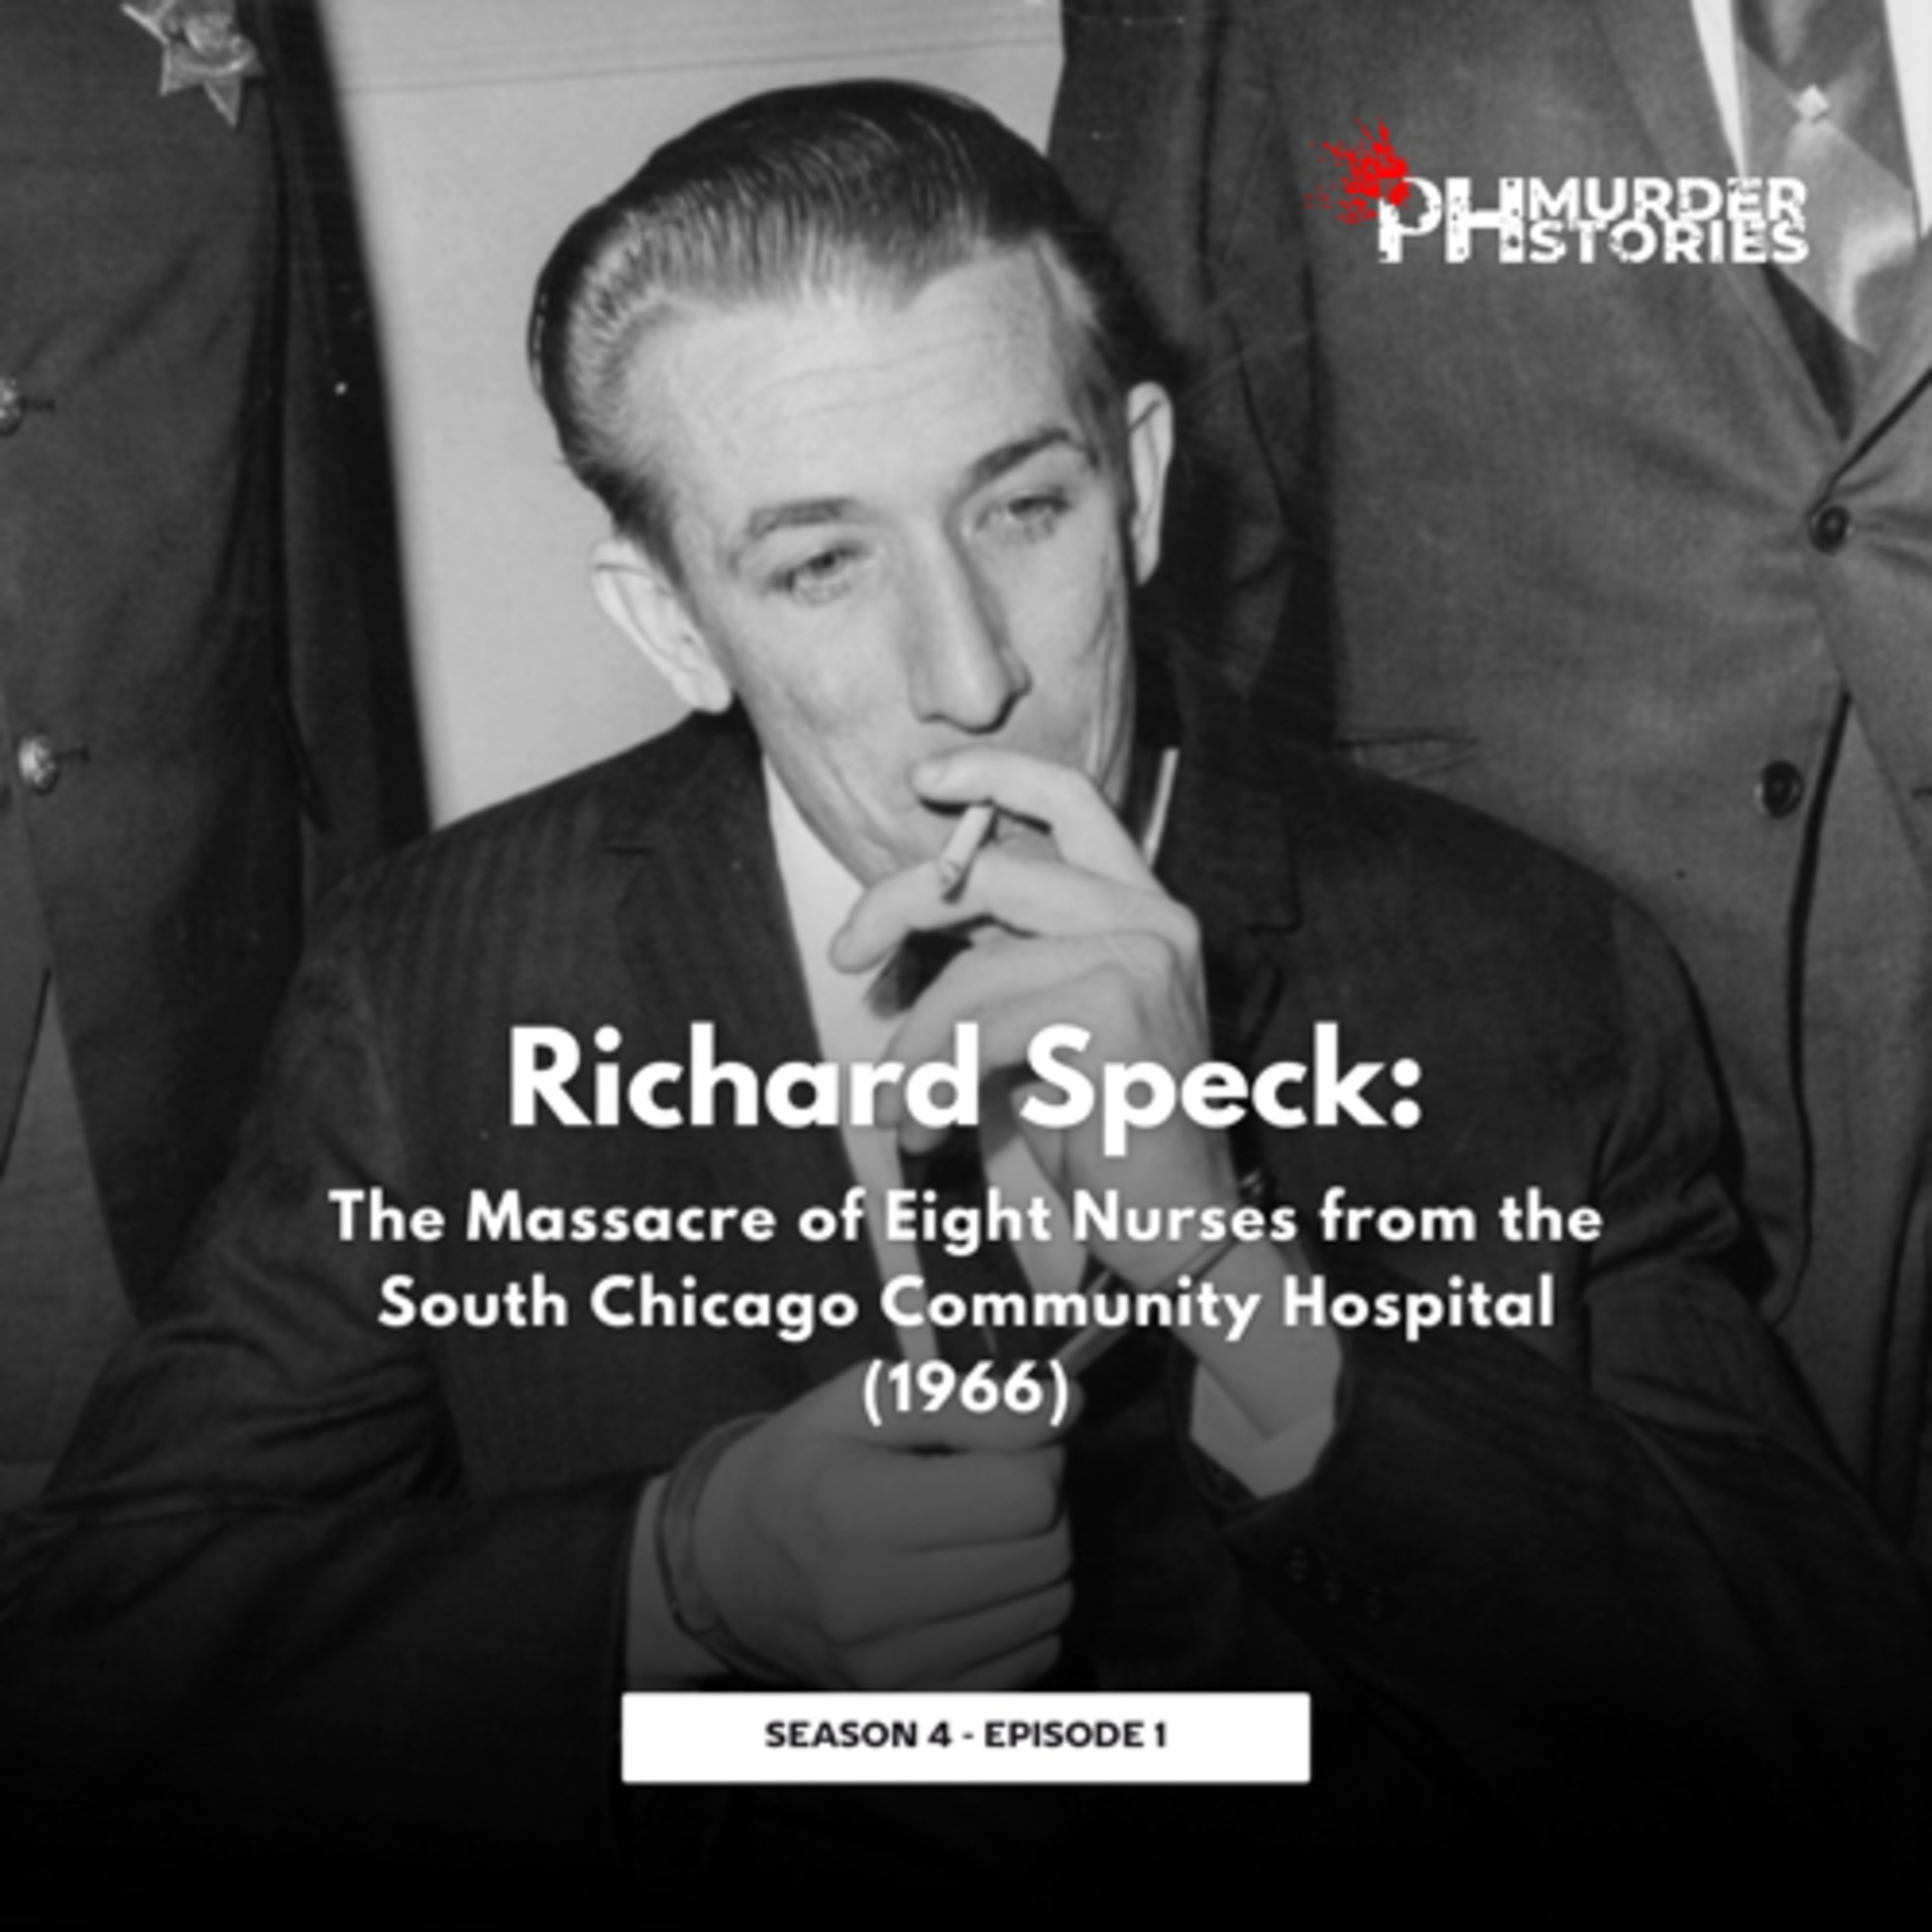 Richard Speck: The Massacre of Eight Nurses from the South Chicago Community Hospital (1966)